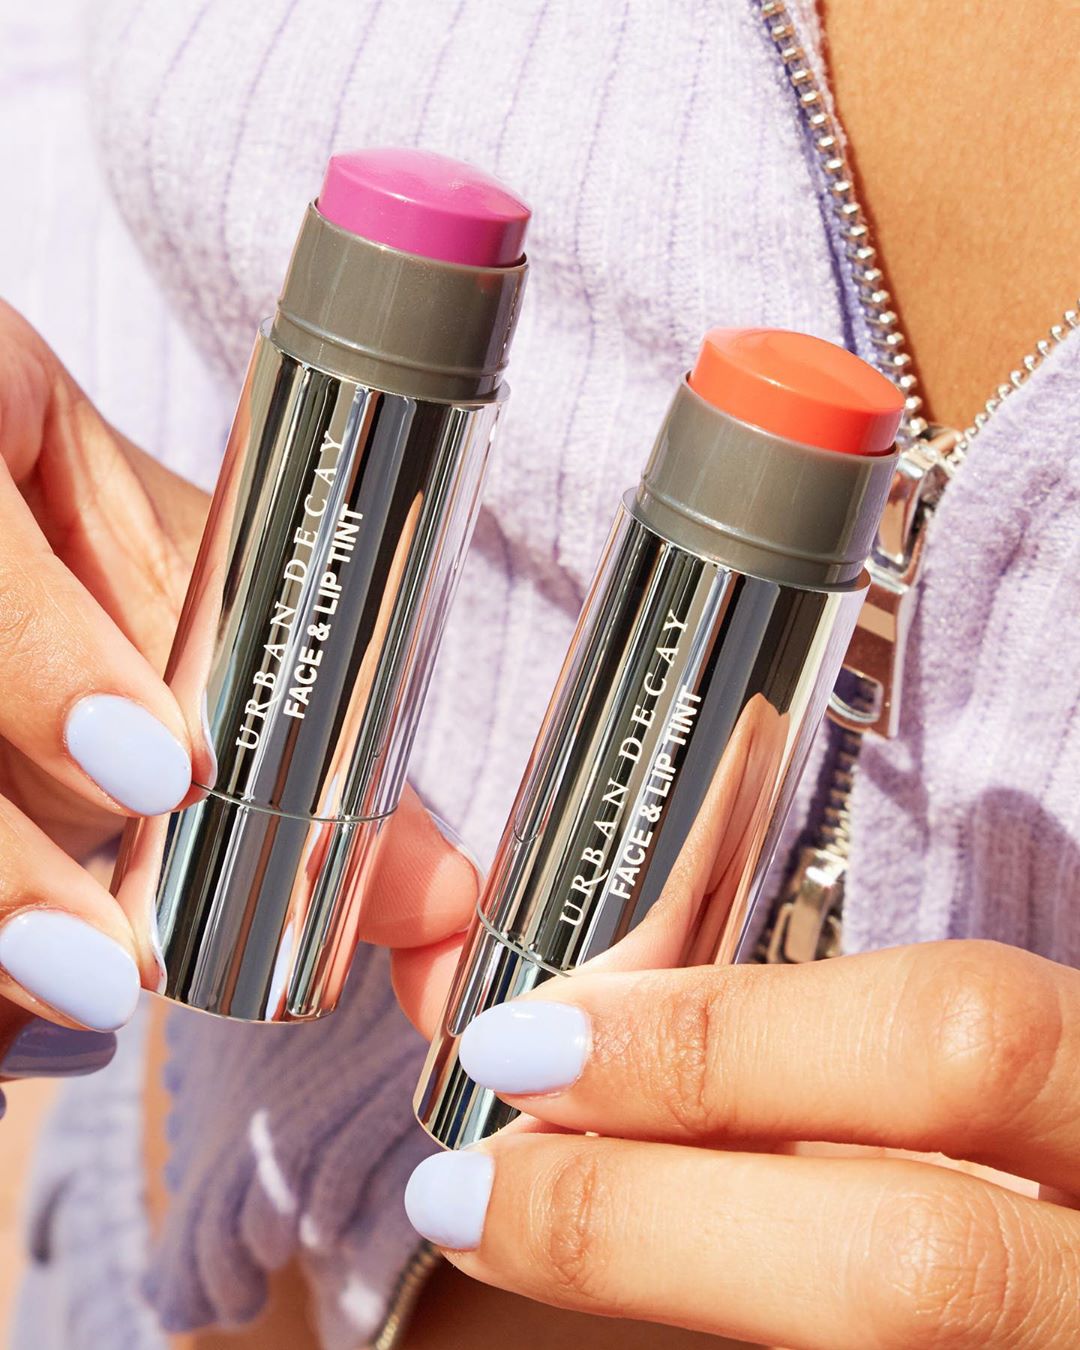 Urban Decay Cosmetics - Which shade is giving you the feelz today—Bittersweet (cool fuchsia) or Bang (sunny red-orange)? Reach for our Stay Naked Face & Lip Tint for that perfect hit of color you crav...